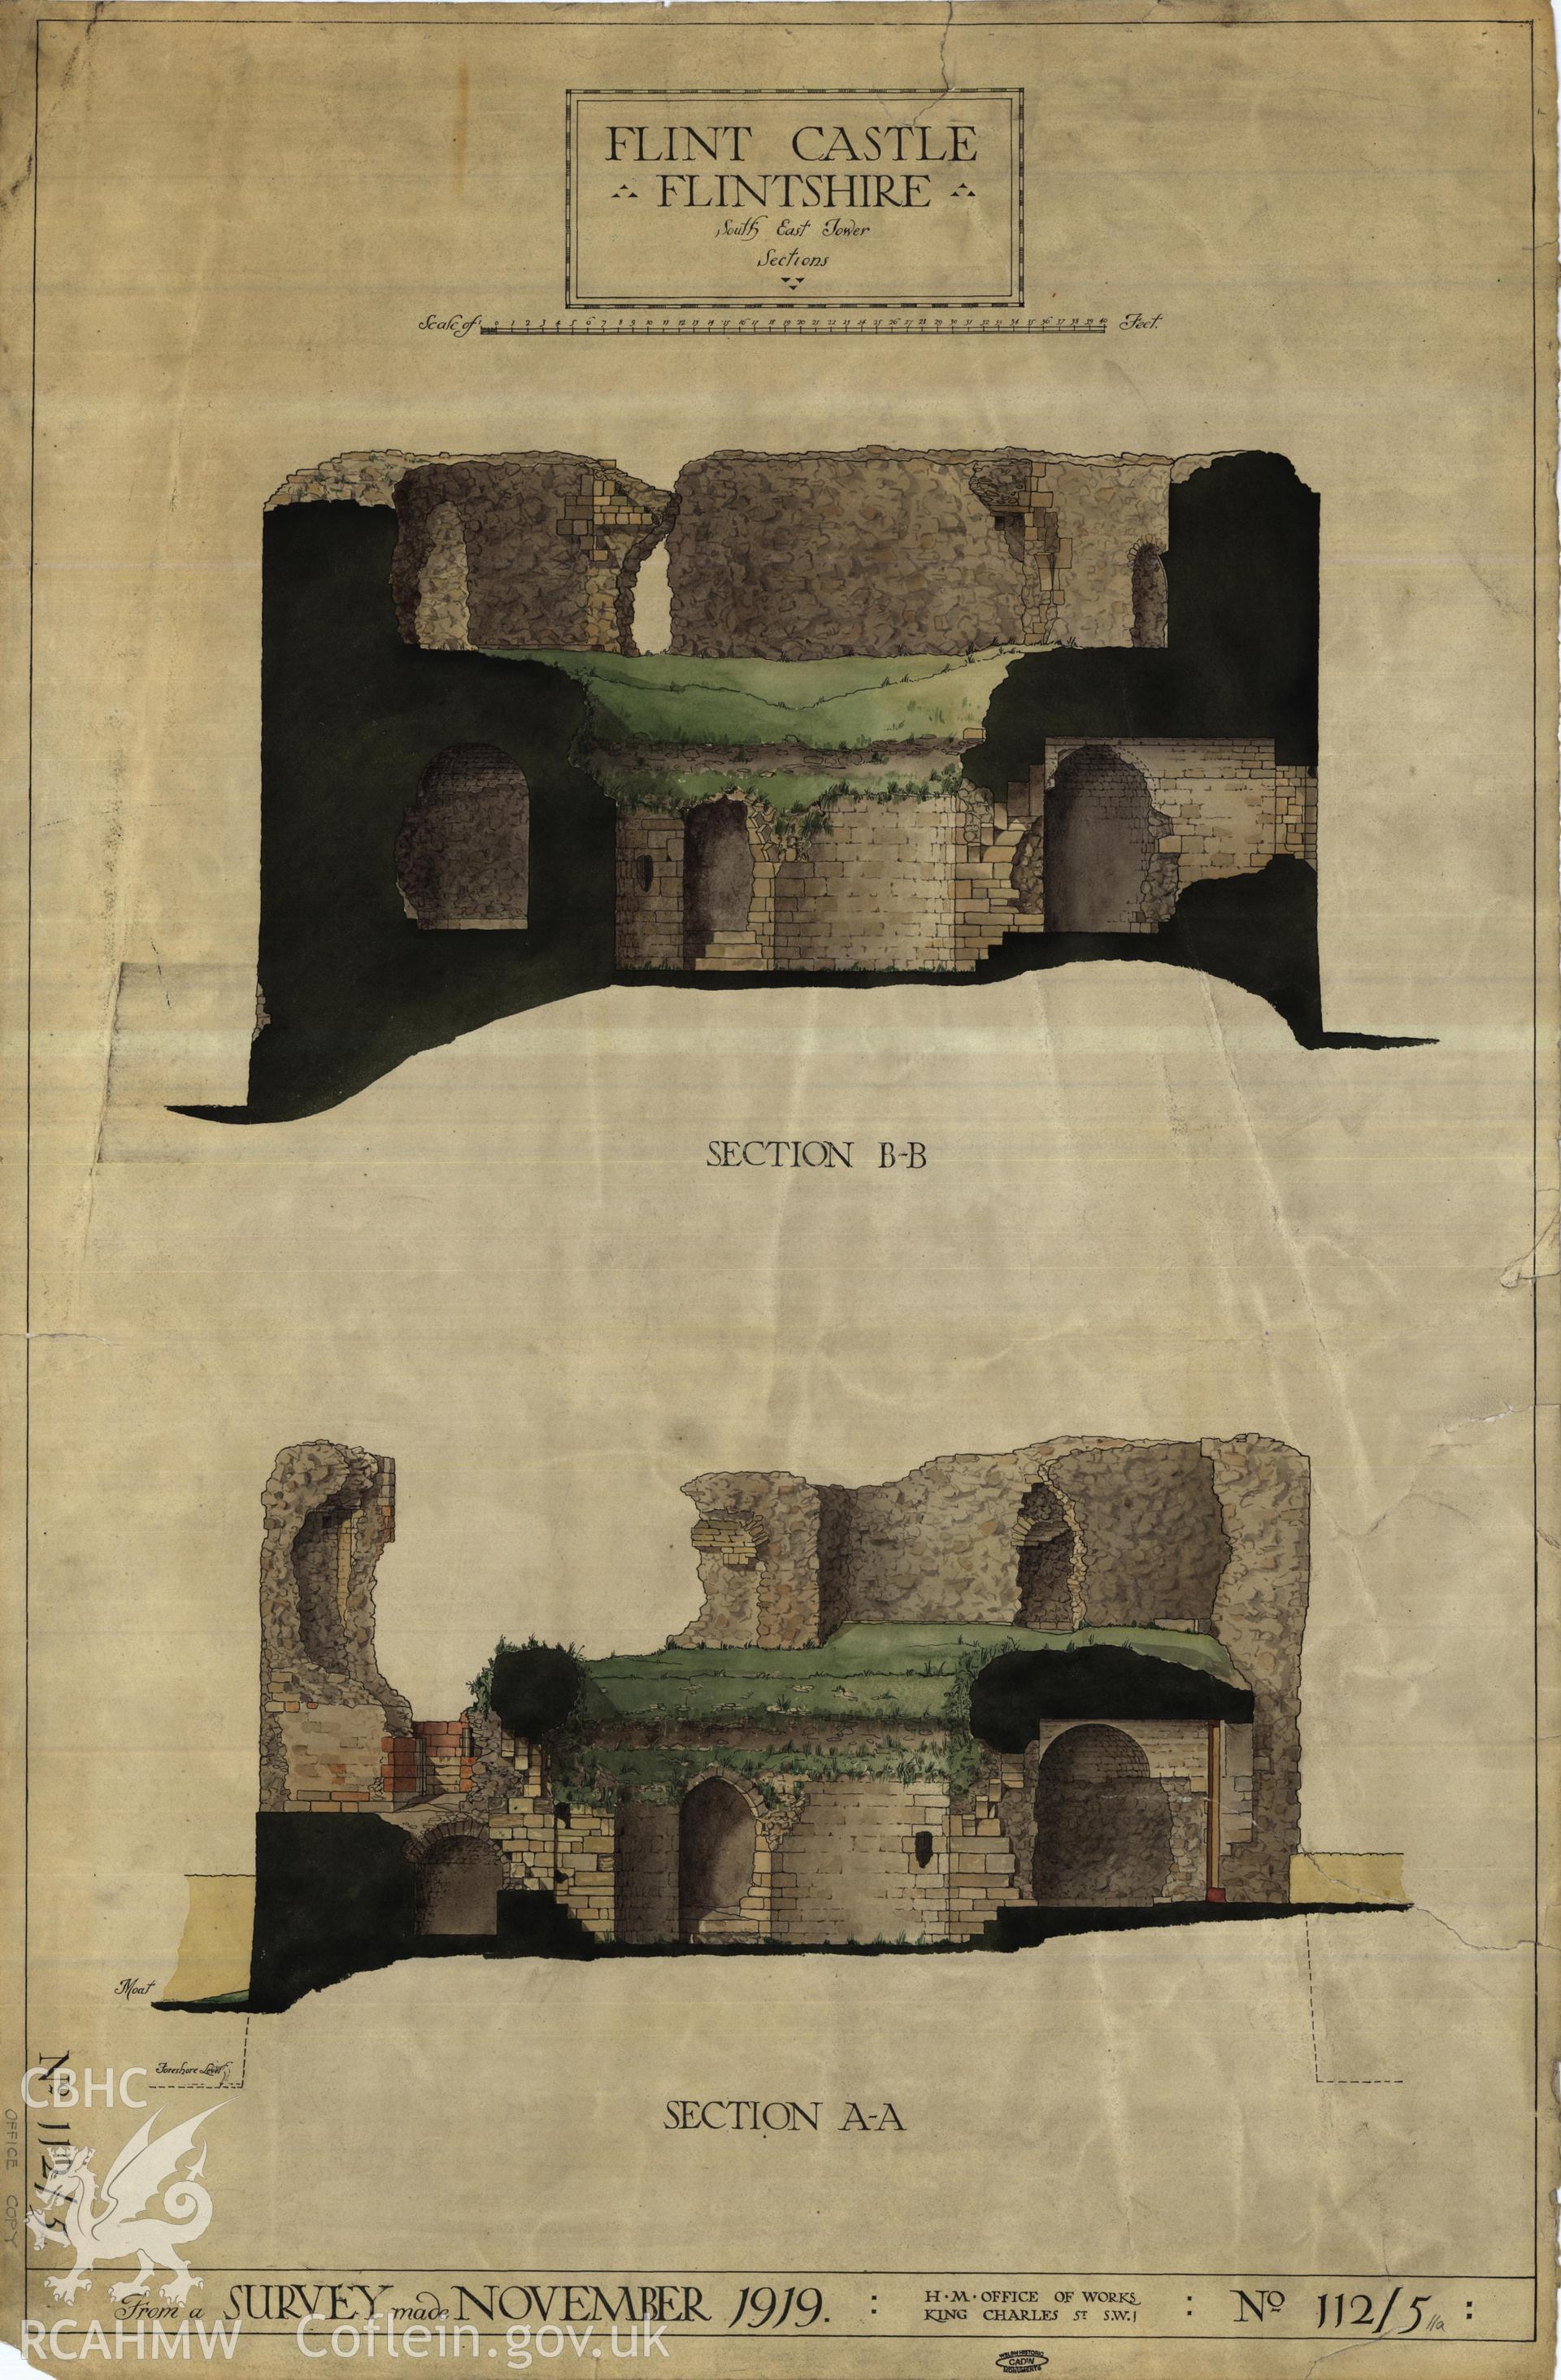 Cadw guardianship monument drawing of Flint Castle. Round keep (SE) 2 sections (tinted). Cadw Ref. No:112/5//a. Scale 1:48.